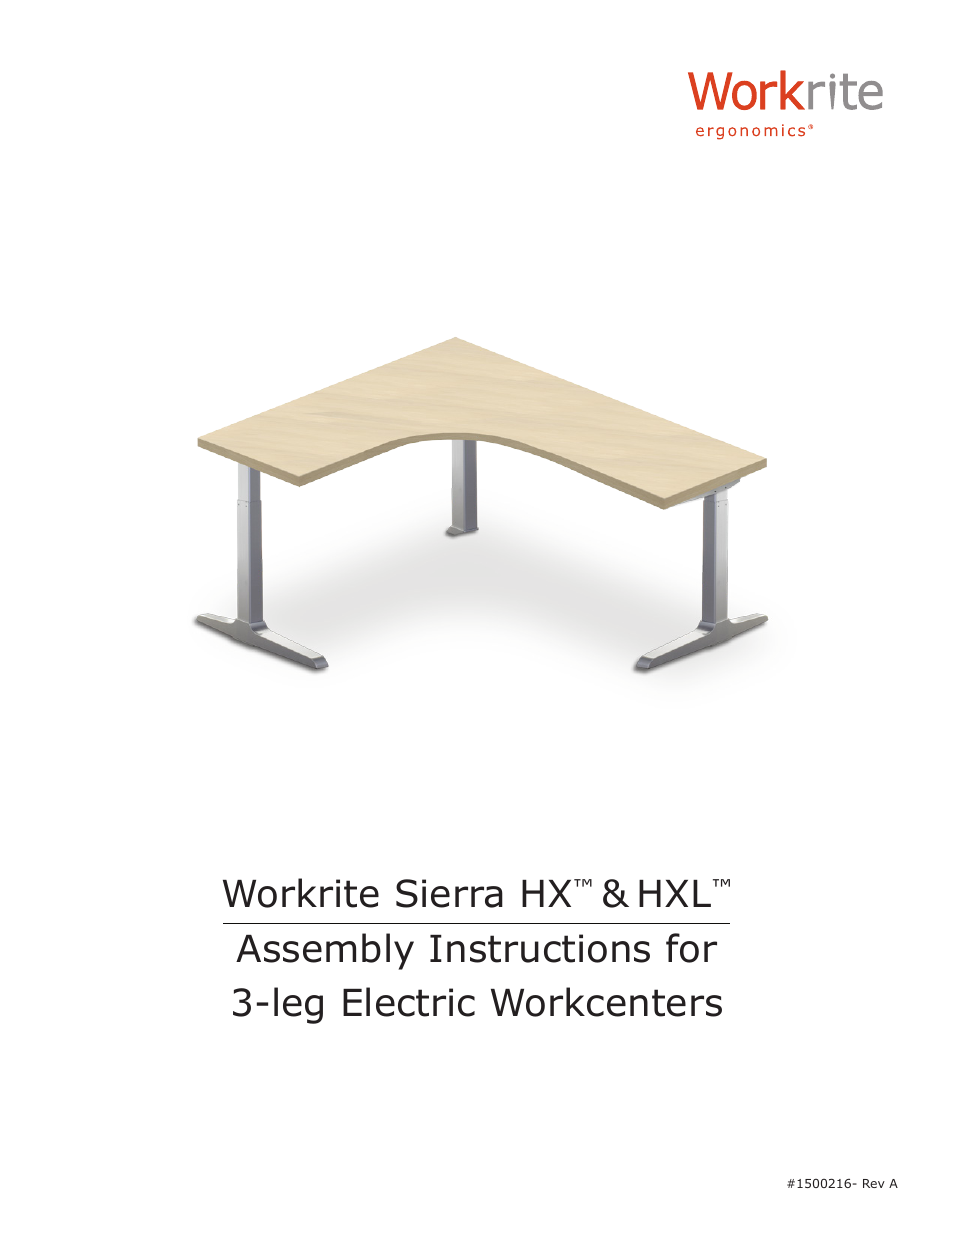 Sierra HXL Electric Assembly Instructions for 3-leg Electric Workcenters